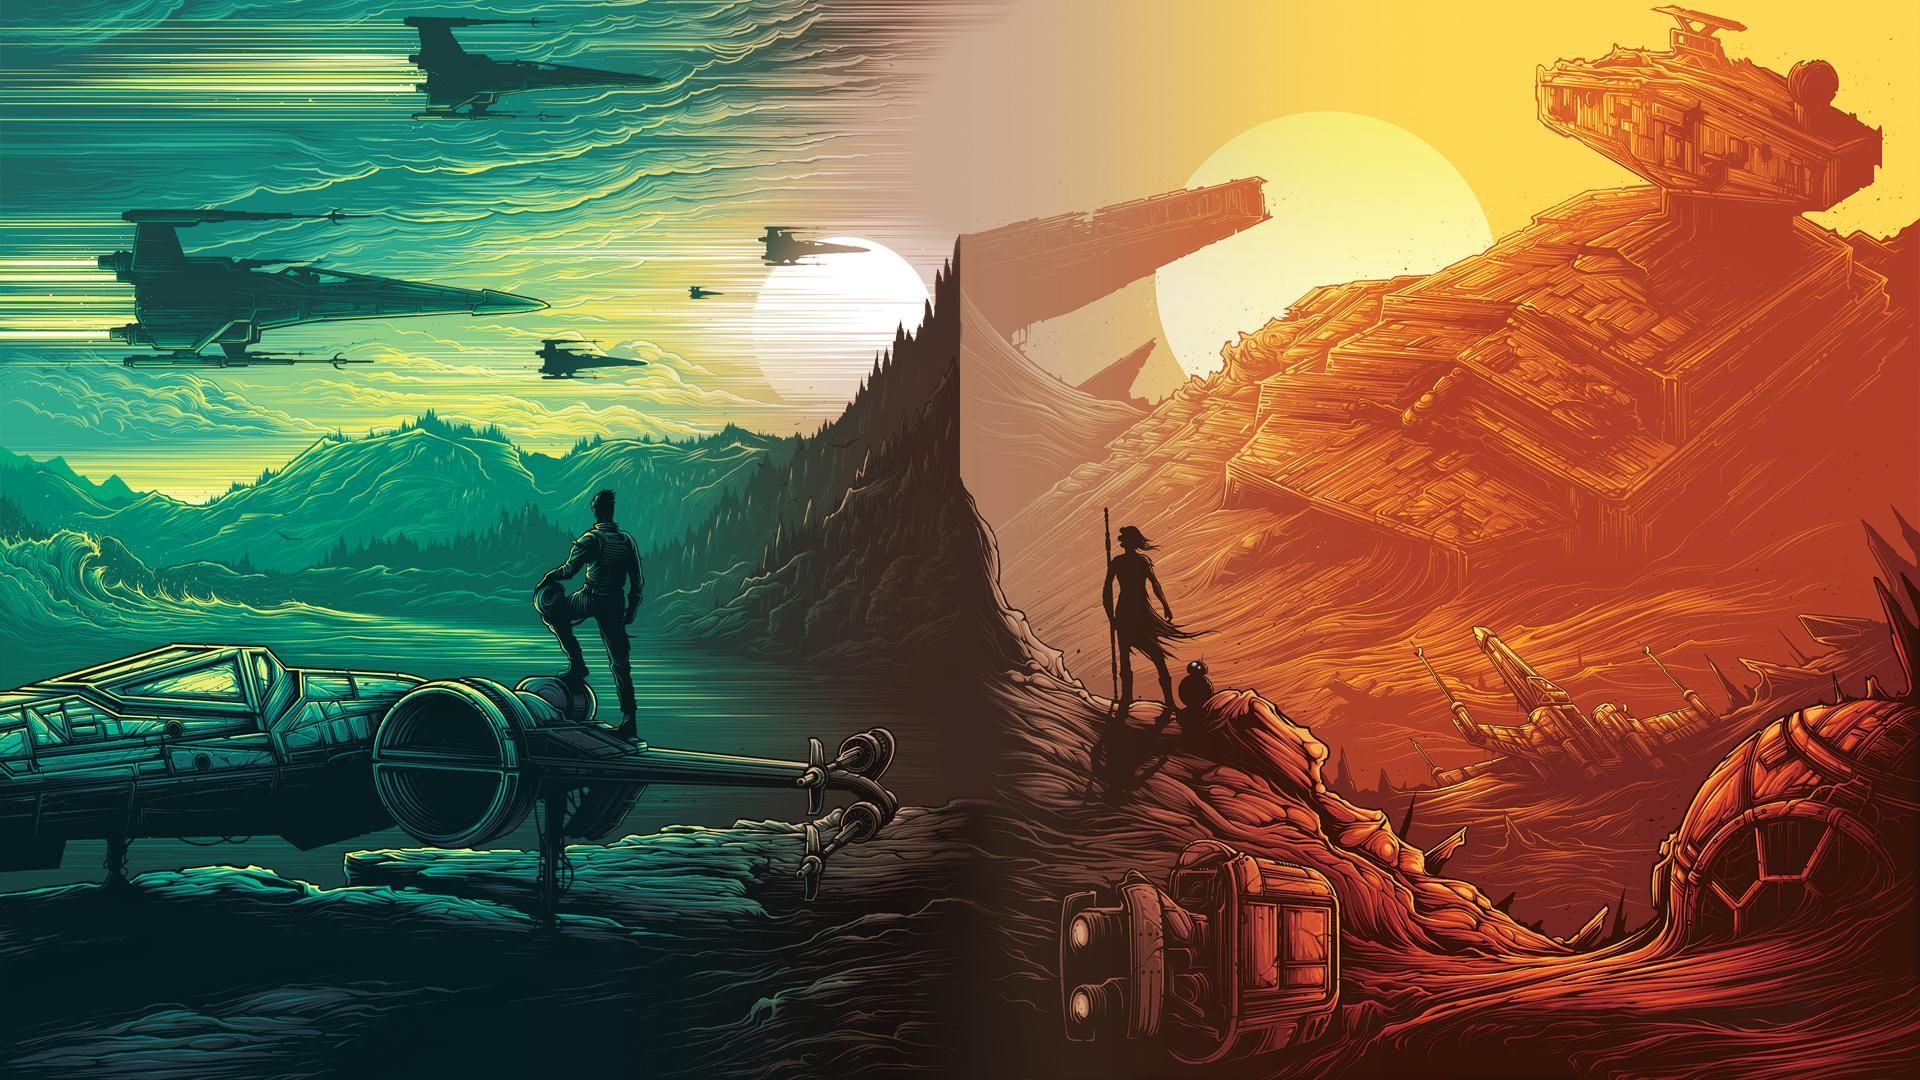 Made a wallpaper /w the two IMAX posters. Star wars picture, Star wars wallpaper, Star wars episode vii